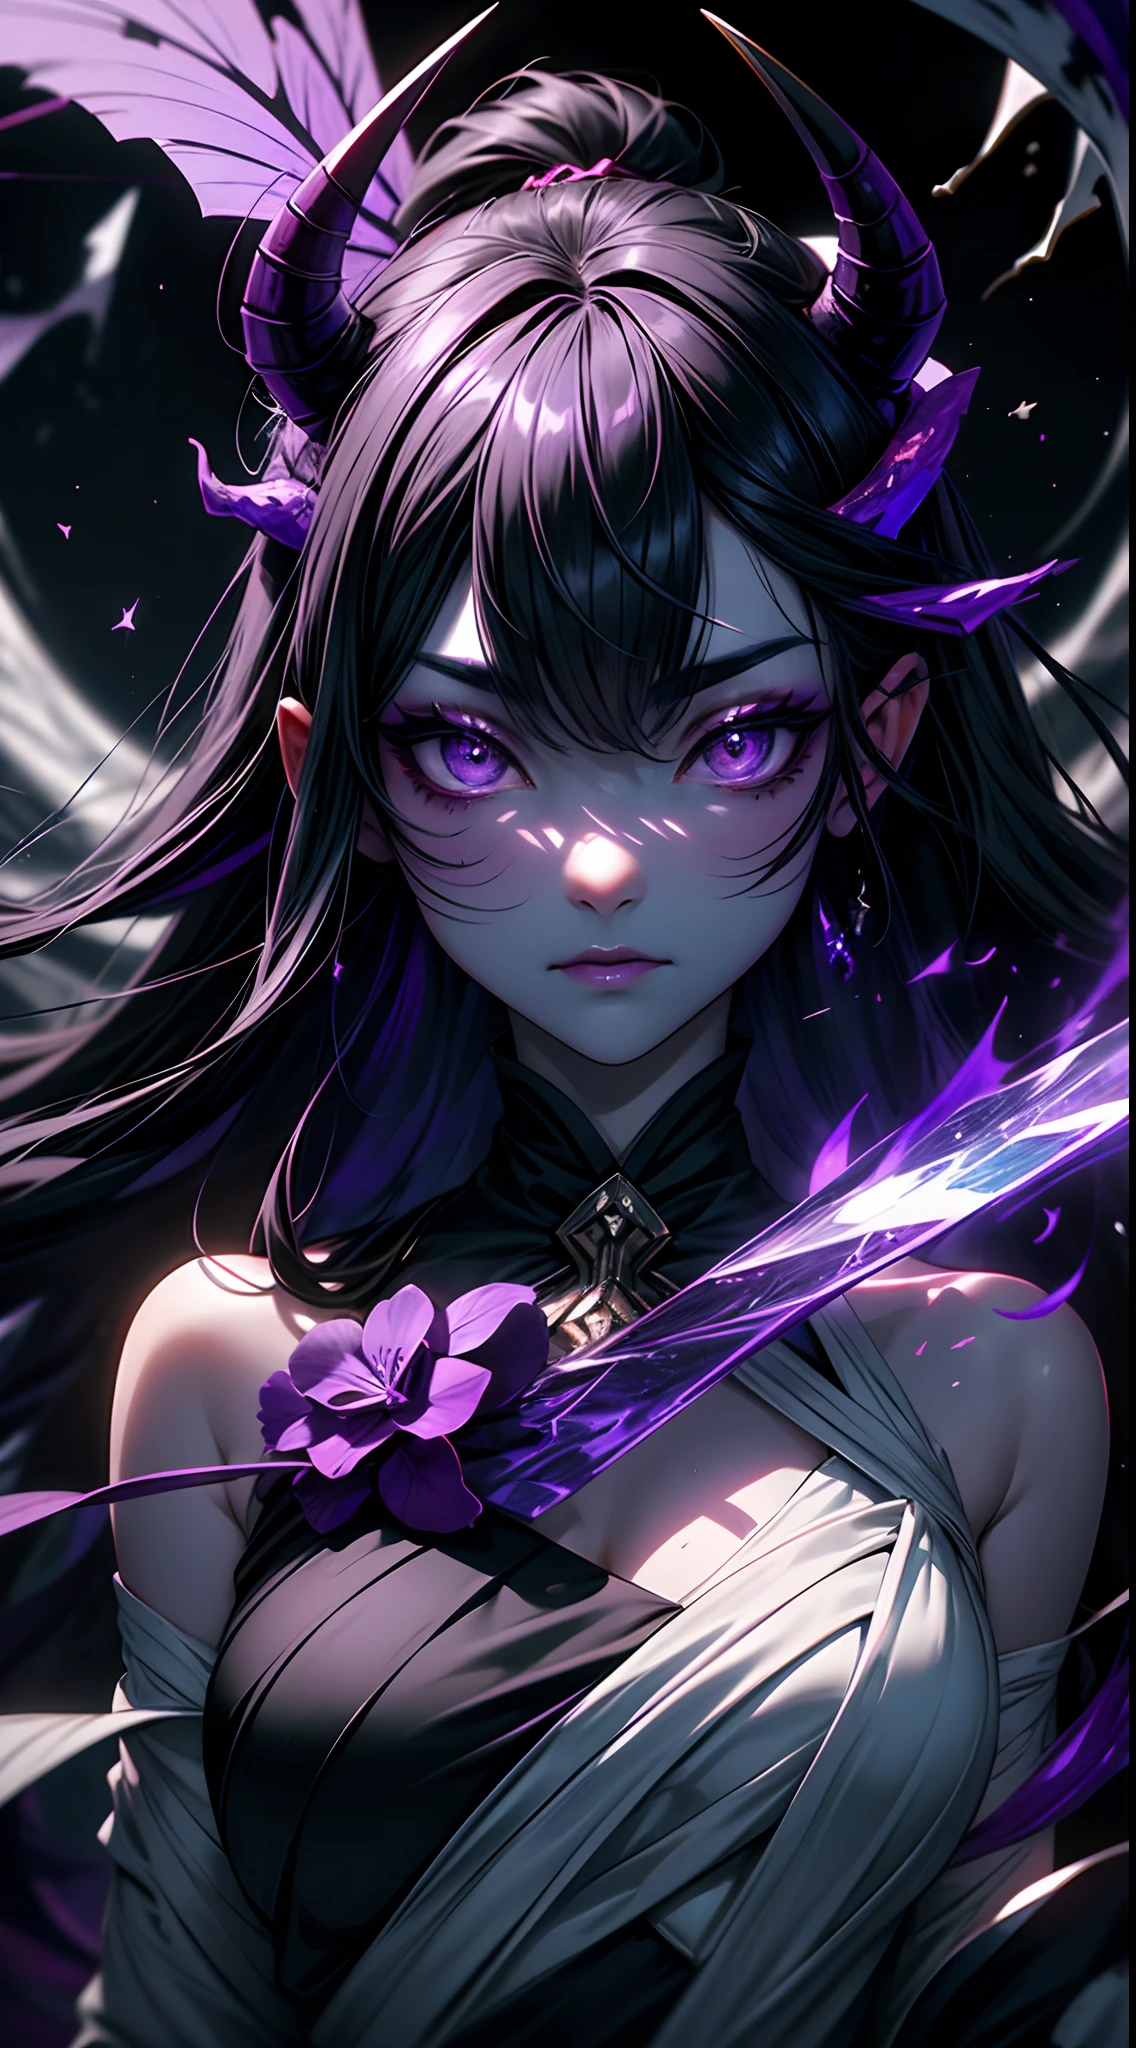 oni, demon girl, ethereal scars on face, twisted horns, midnight black hair, otherworldly, iridescent ((violet skin)), astral plane, hovering among stars, transcendent meditation, detailed face, spectral staff, flowing robes, wholesome